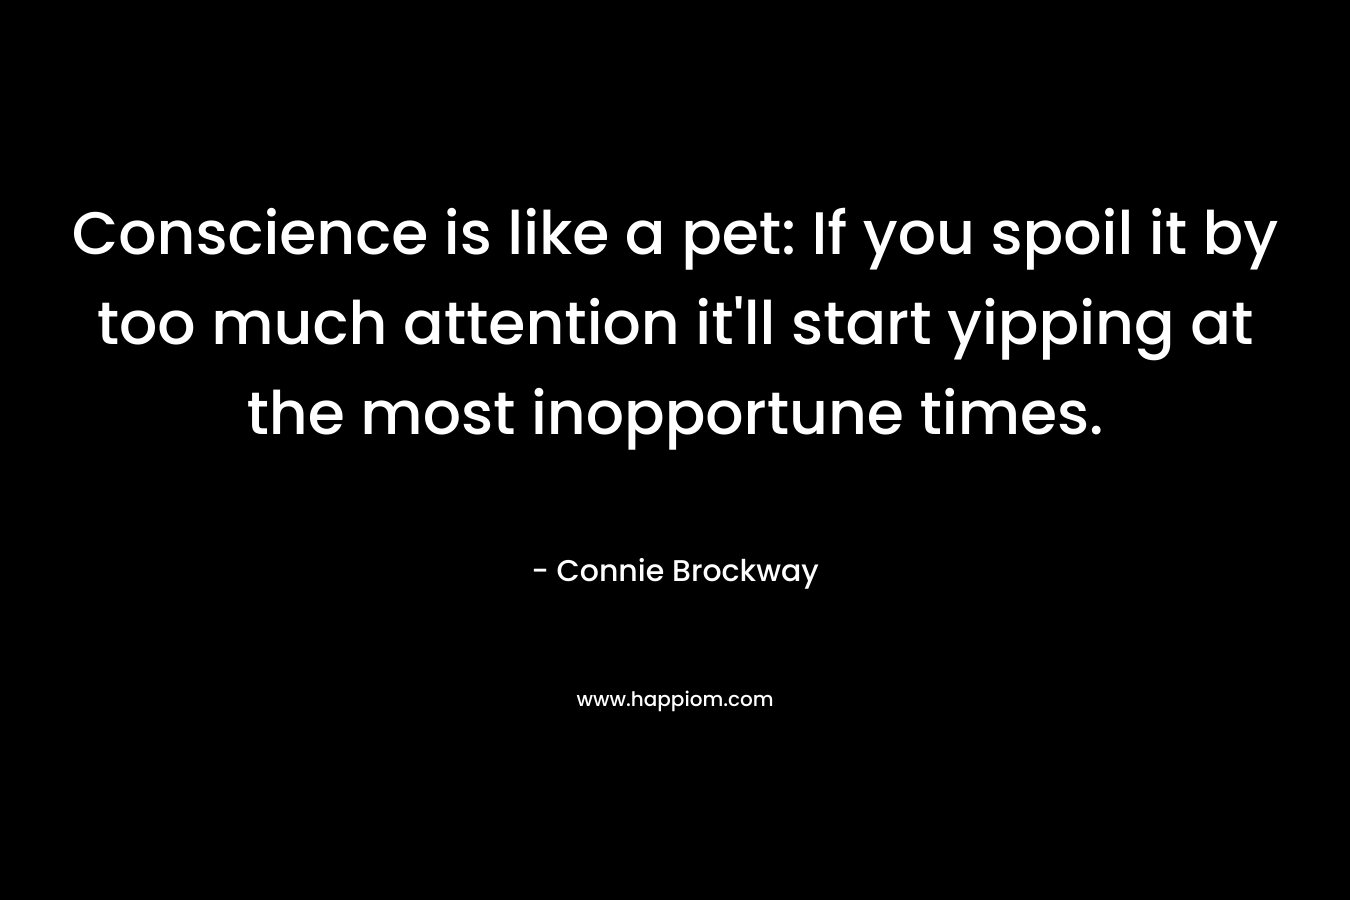 Conscience is like a pet: If you spoil it by too much attention it’ll start yipping at the most inopportune times. – Connie Brockway